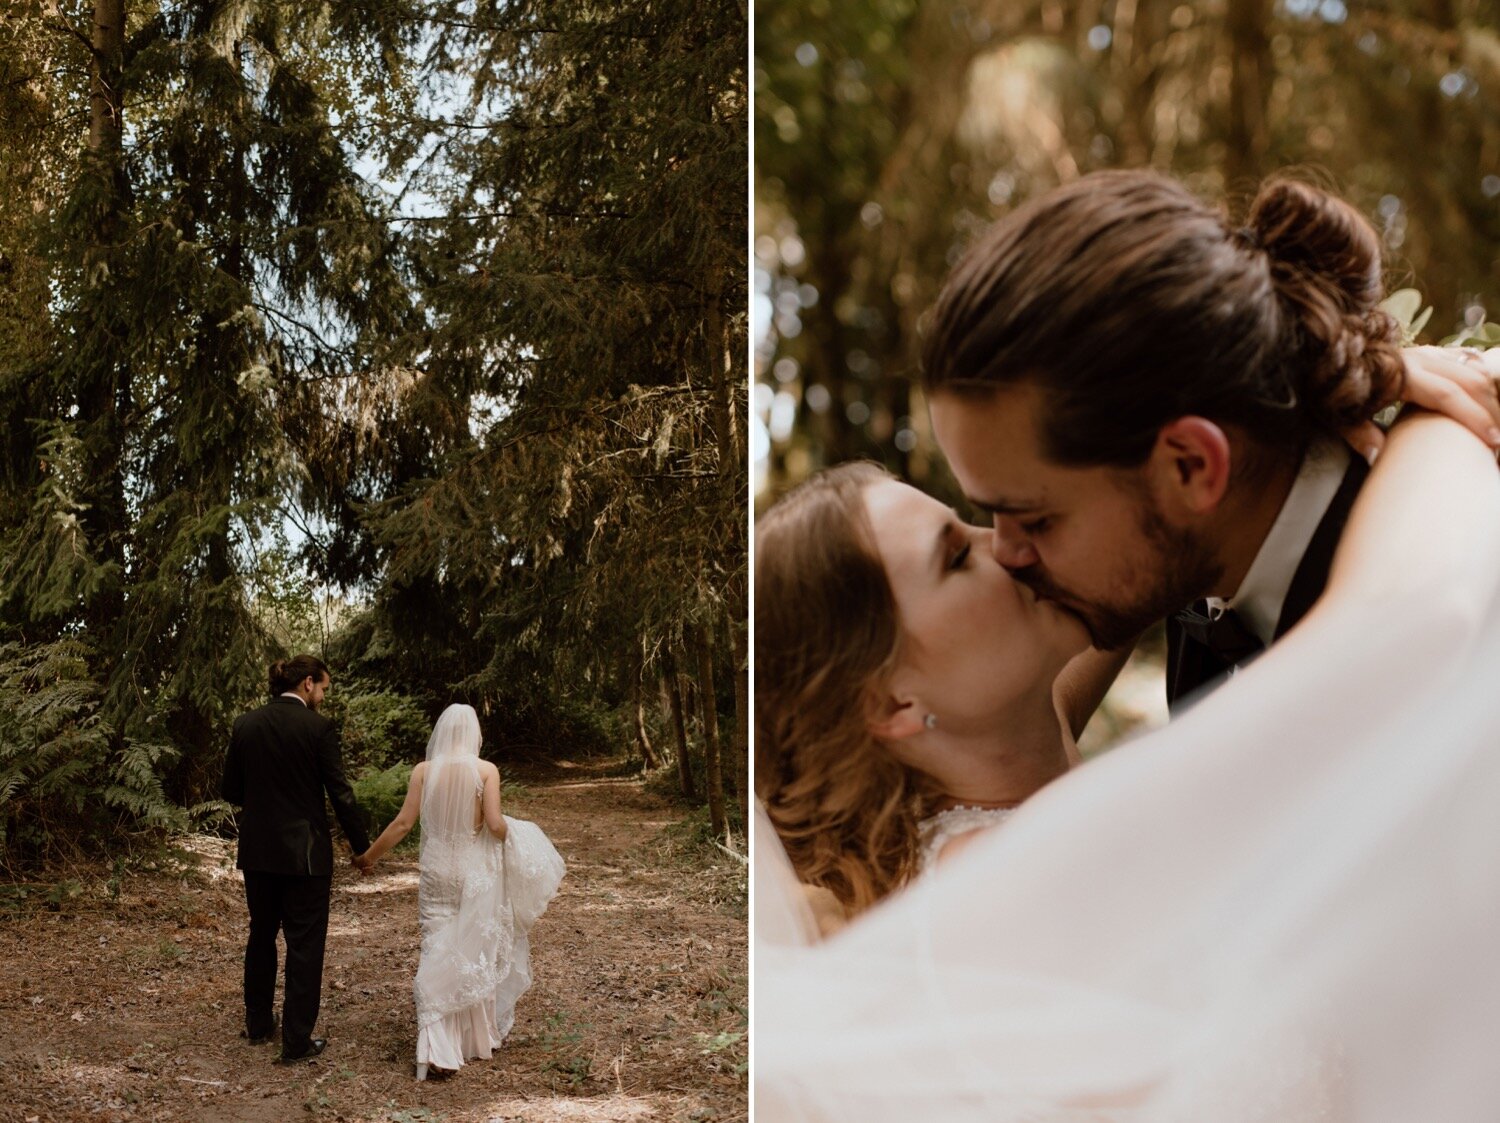 Emma and David's Moody and Romantic Wedding in the Woods | Oregon Wedding Photographer